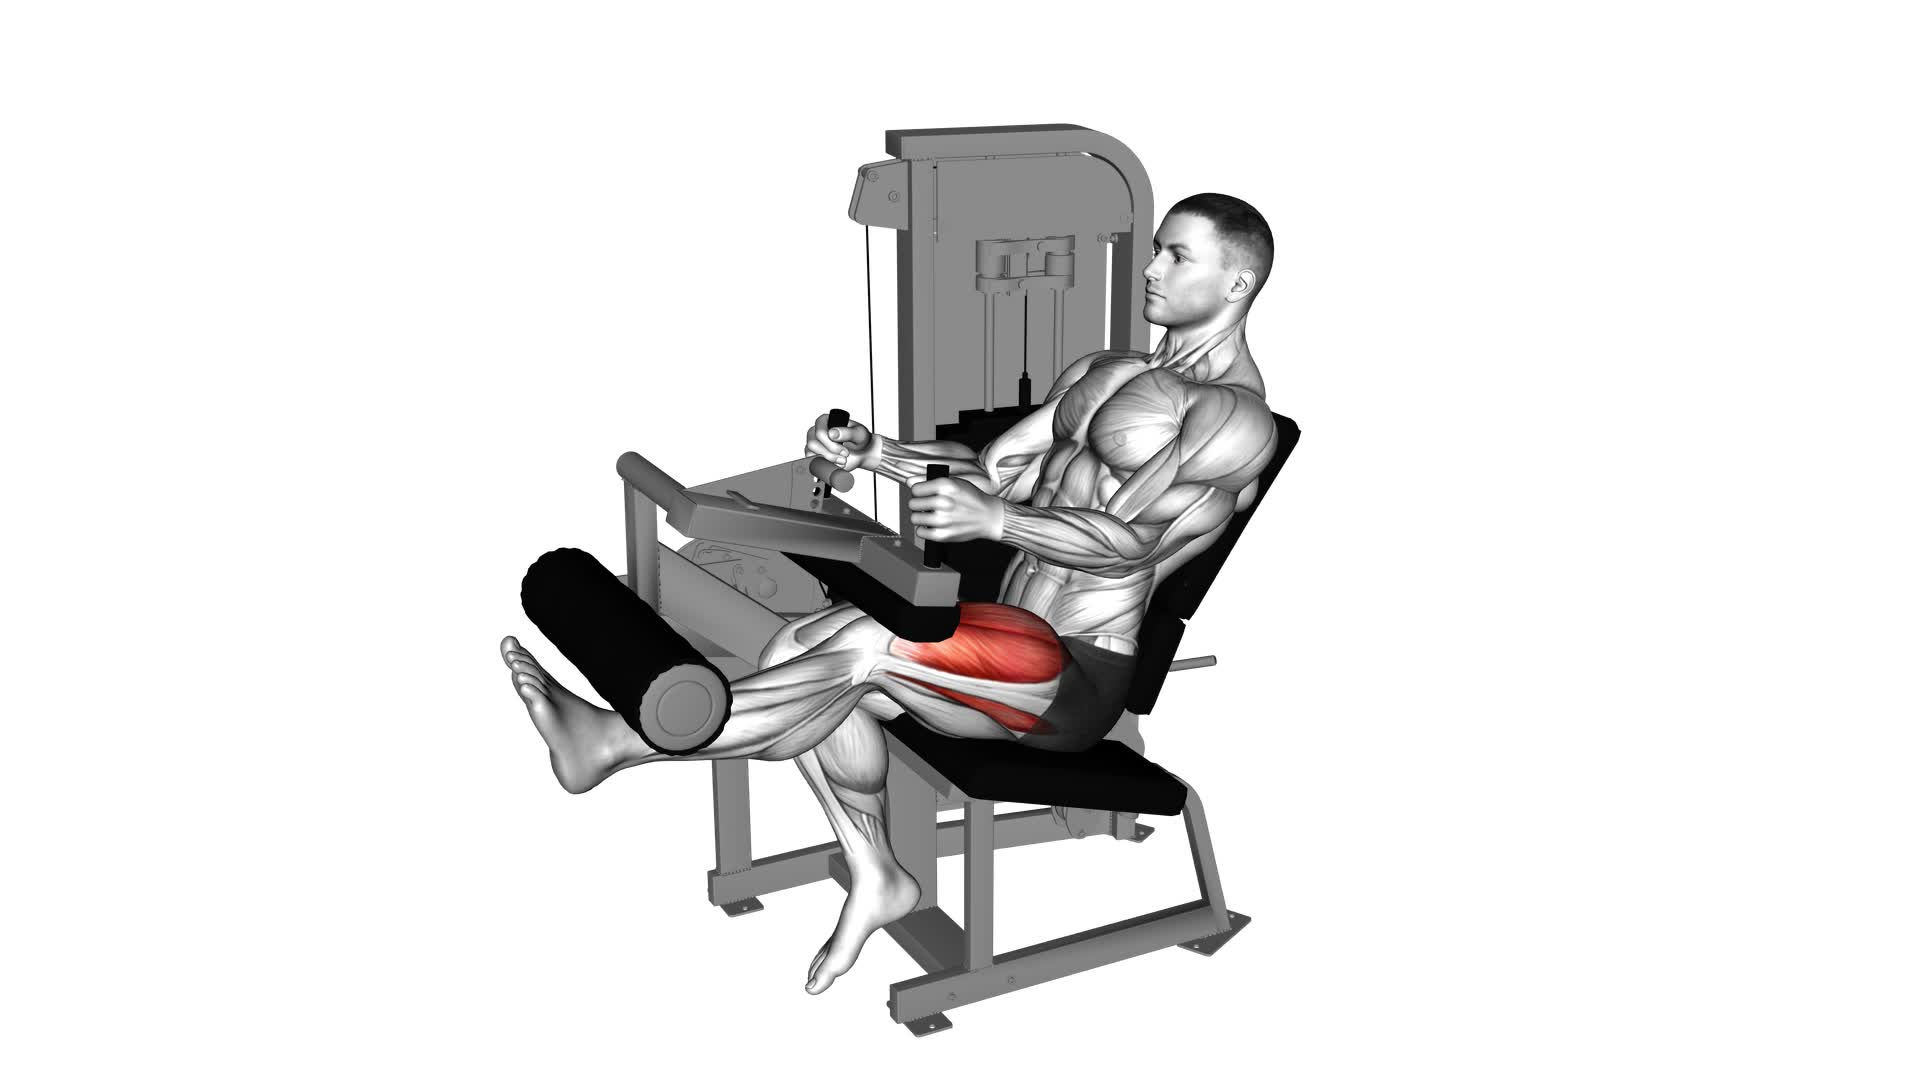 Lever Seated Leg Extension (VERSION 2) - Video Exercise Guide & Tips